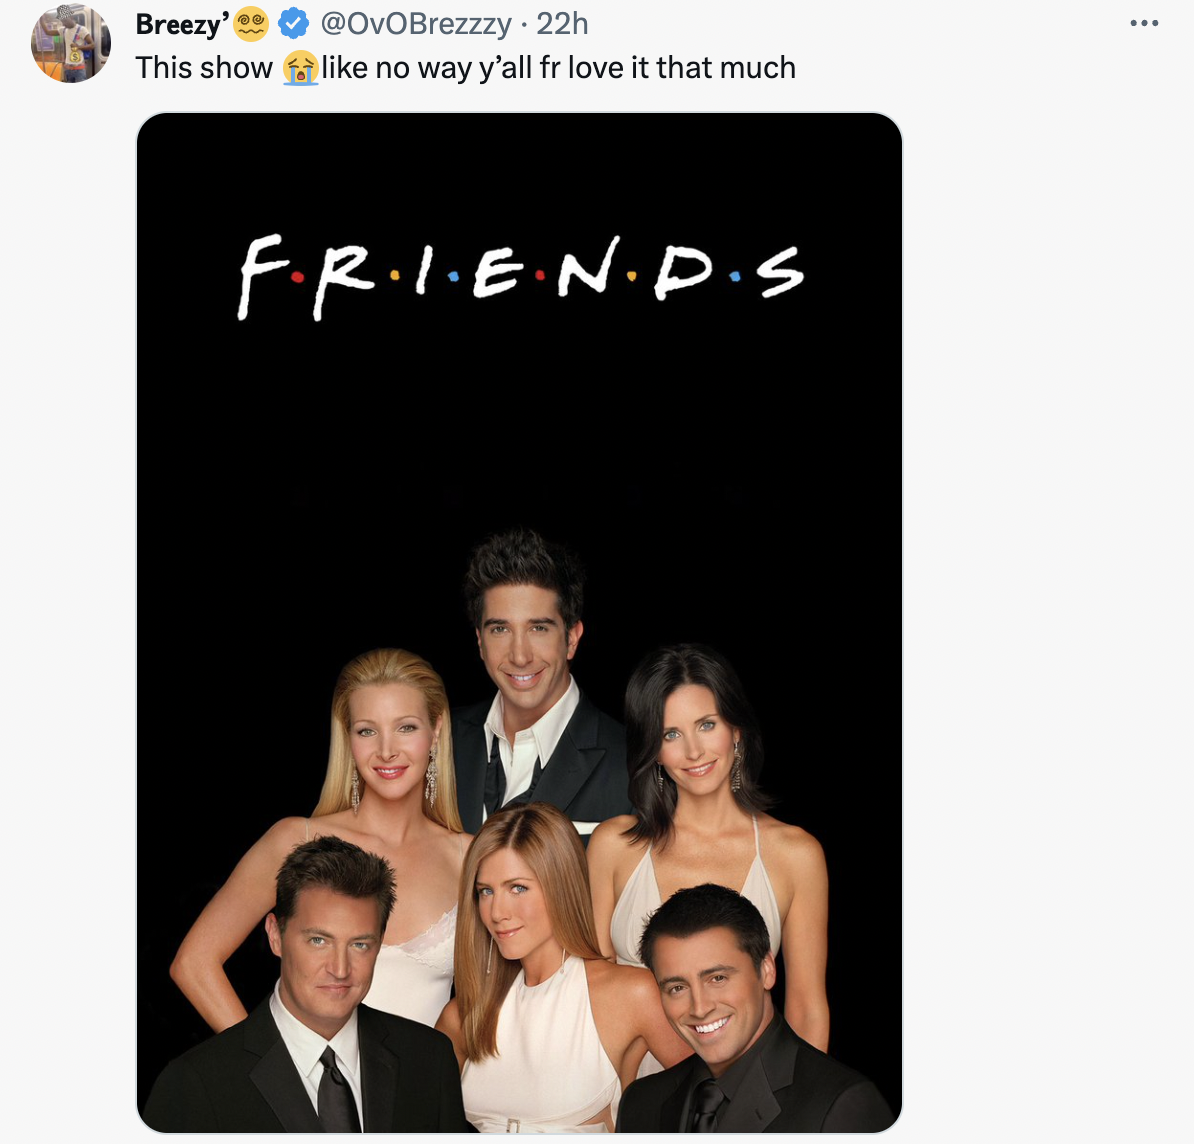 friends tv show - Breezy' This show 22h no way y'all fr love it that much F.R.I.E.N.D.S